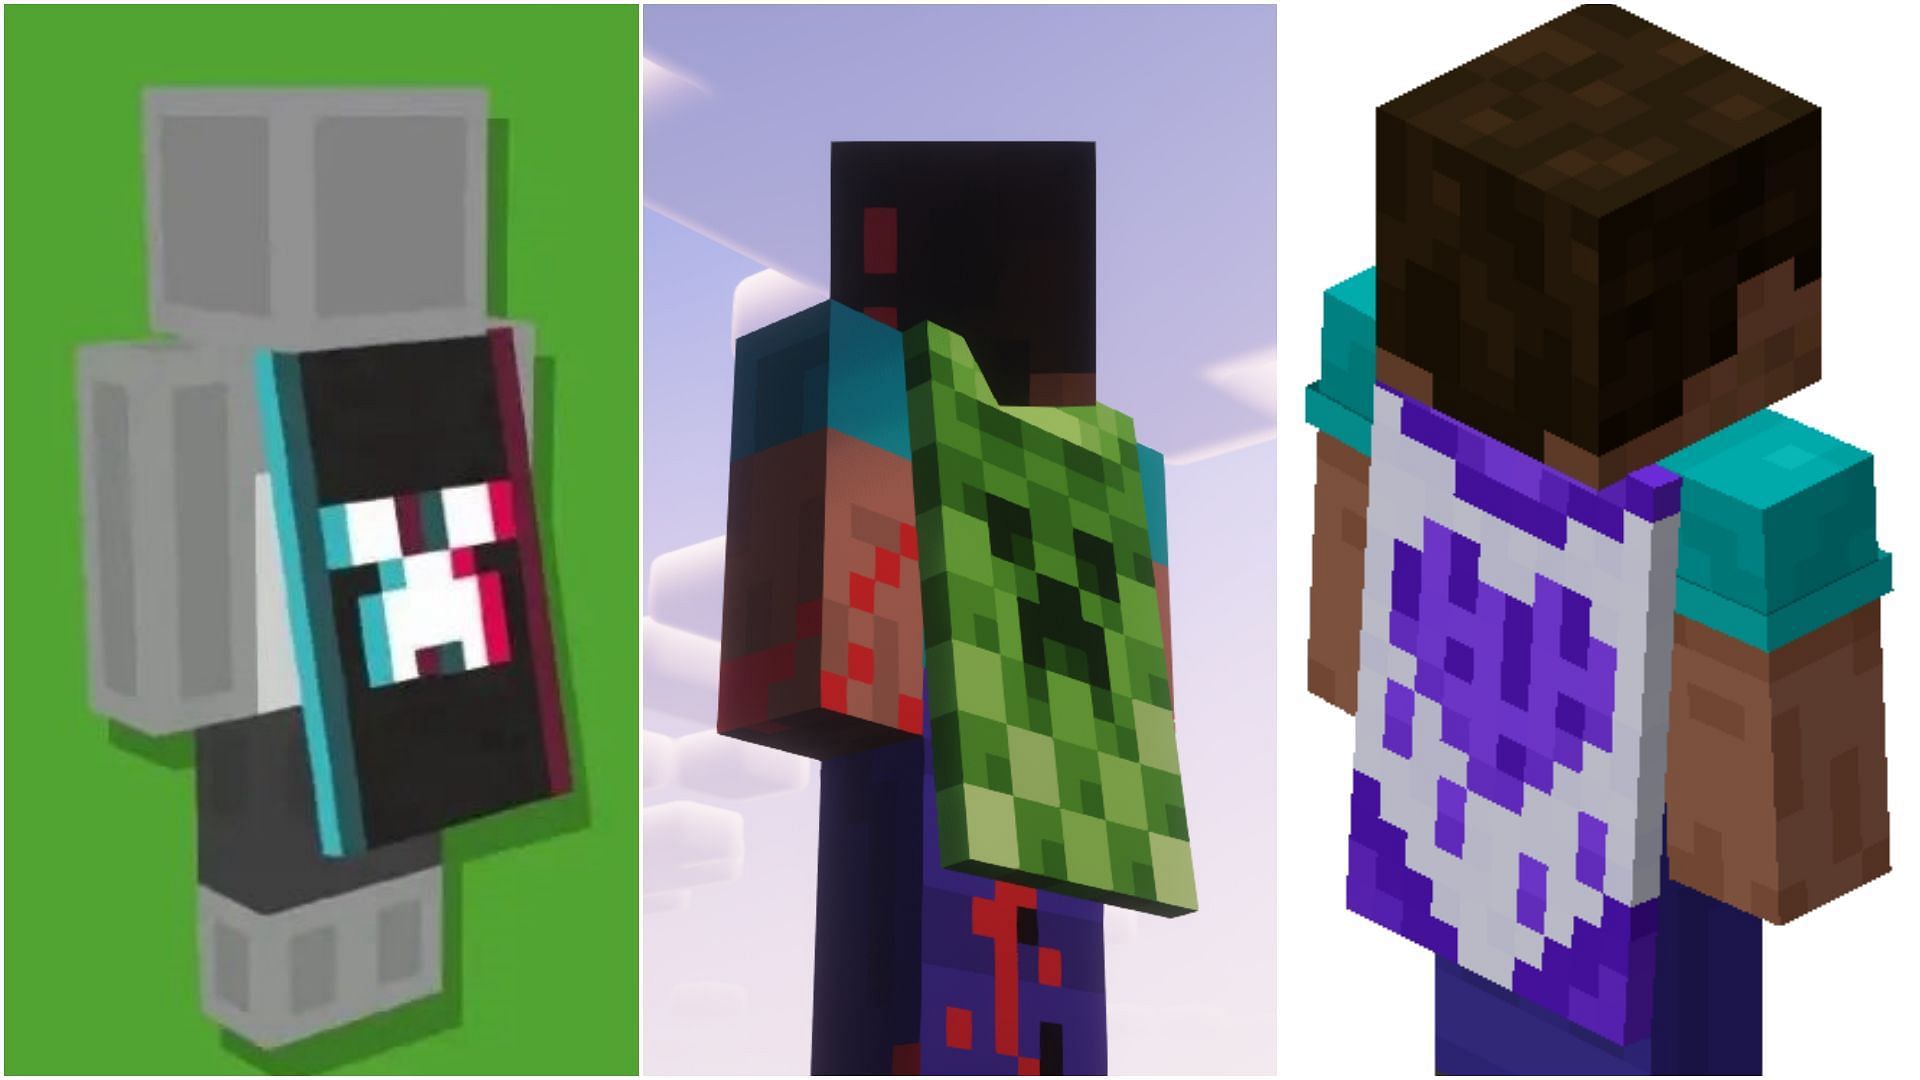 These three capes were given for free during Minecraft